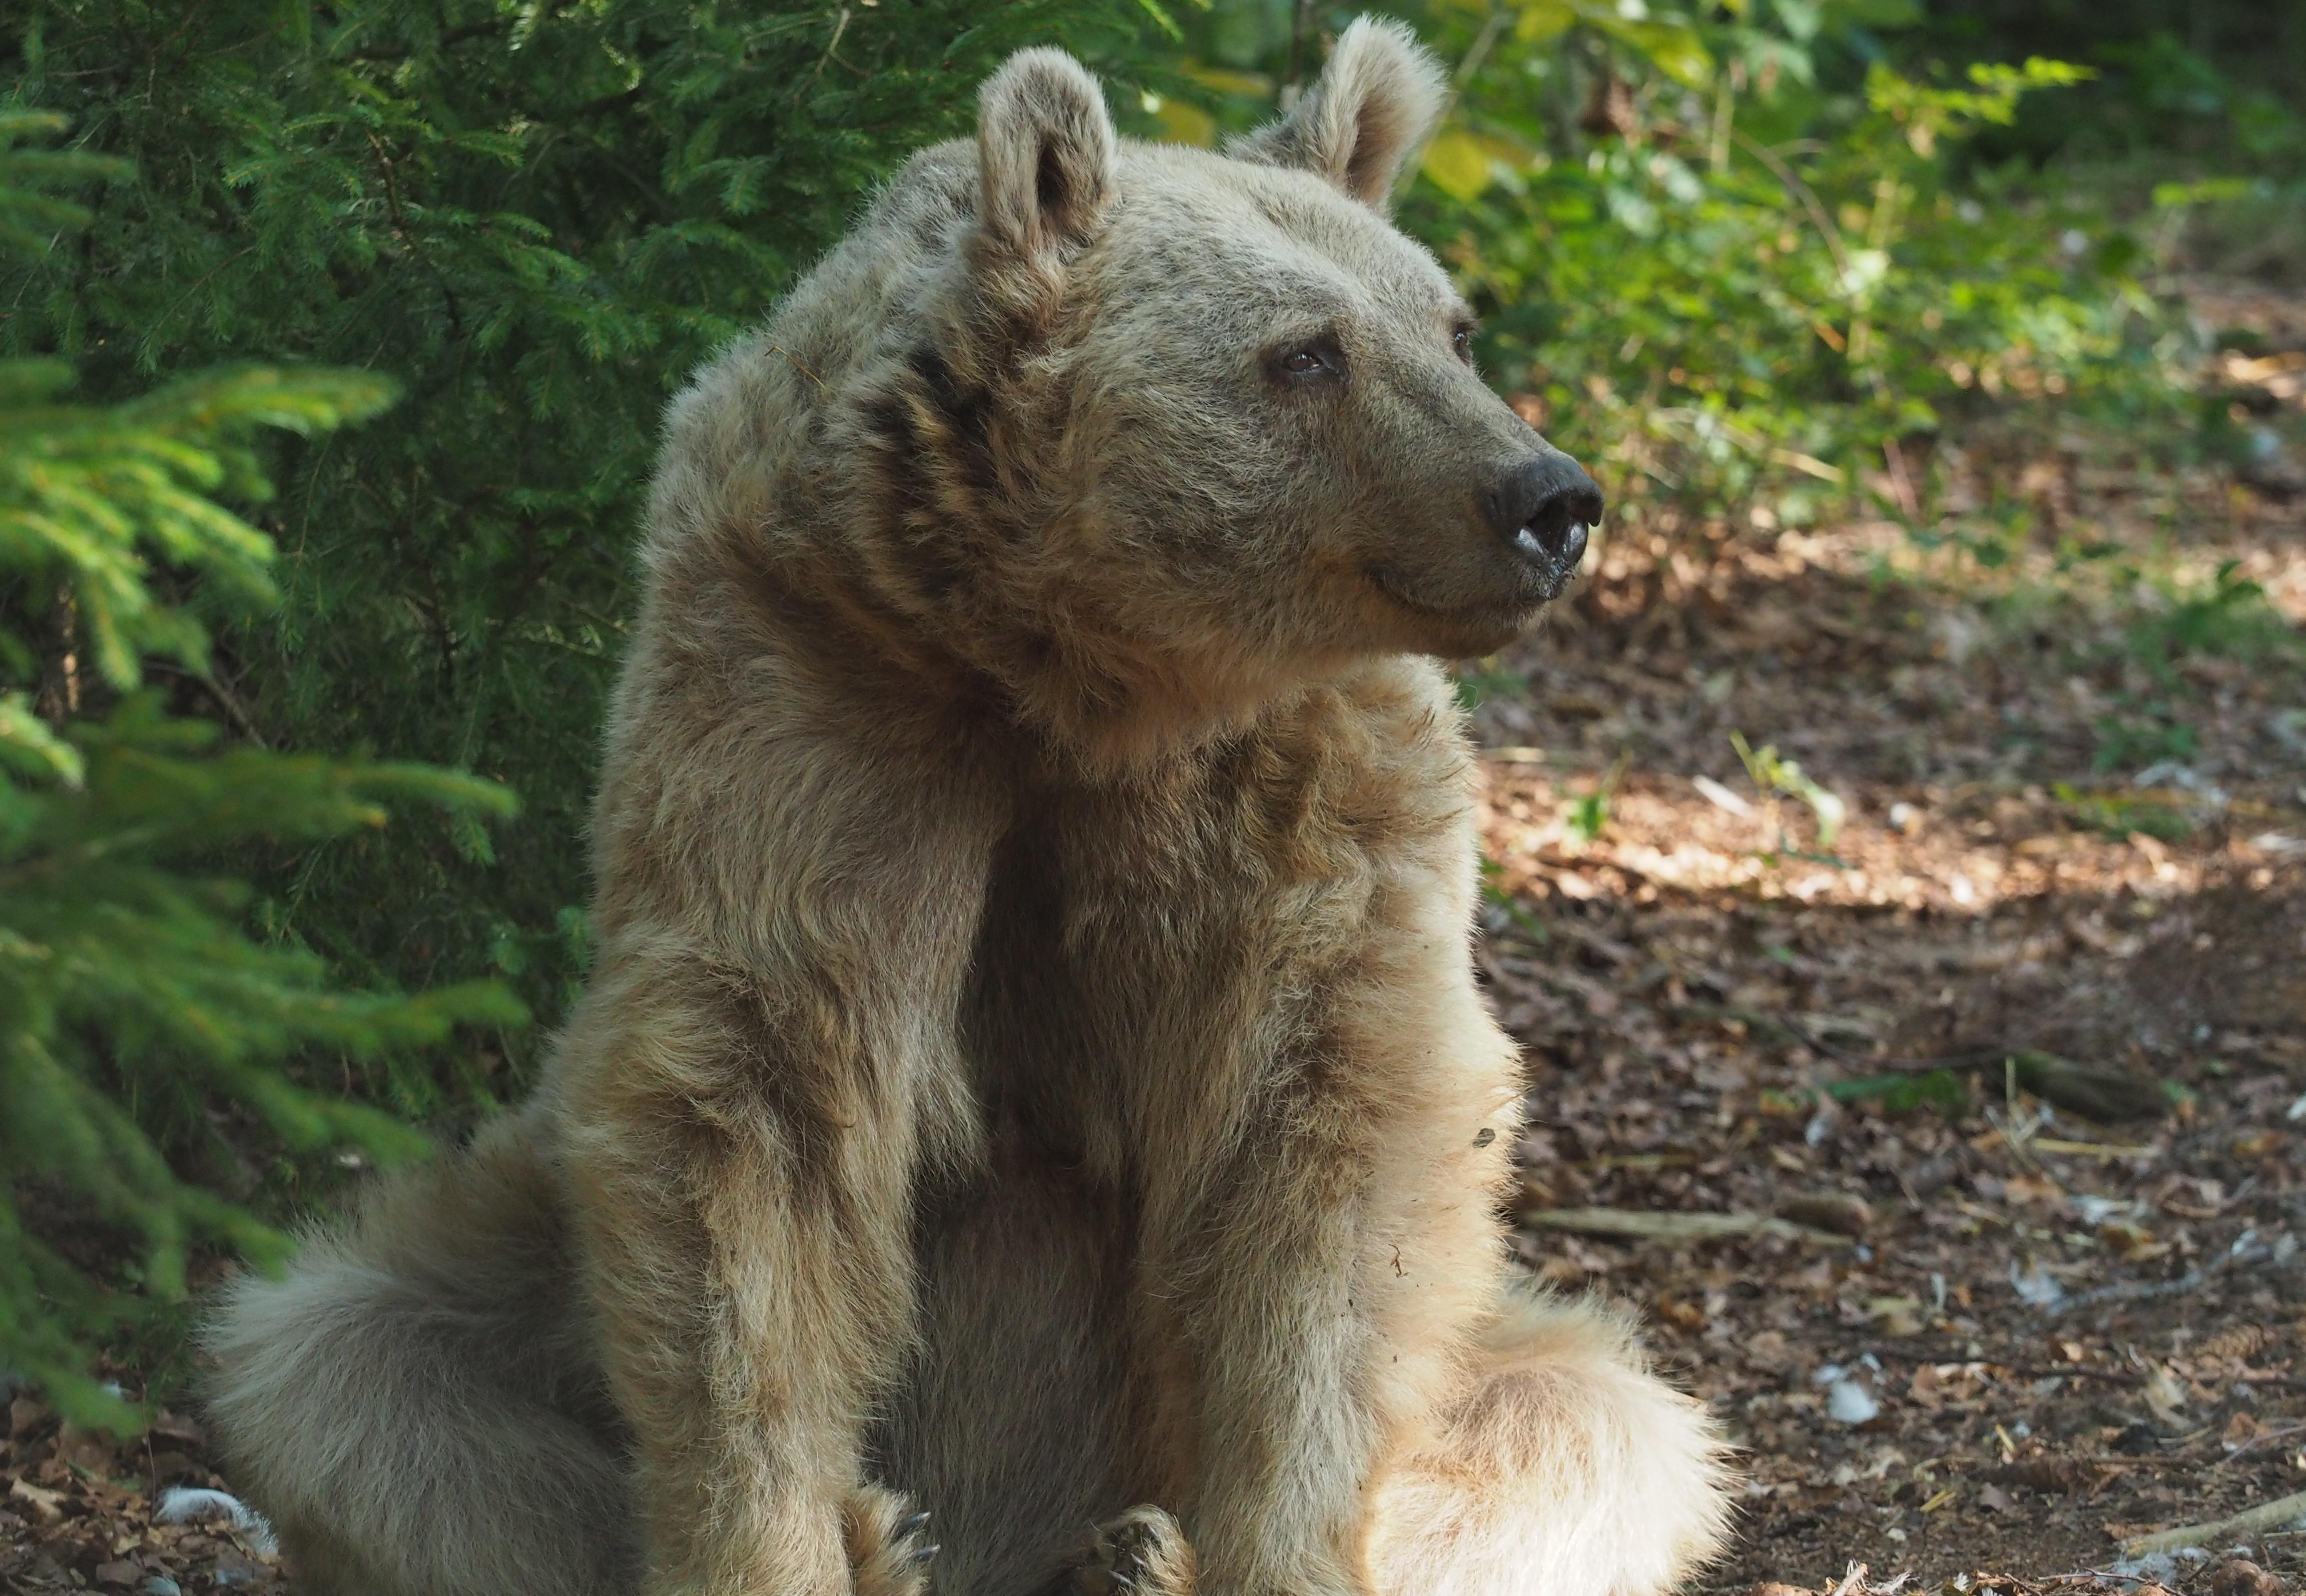 Bear Jerry - BEAR SANCTUARY Arbesbach - A Project of FOUR PAWS